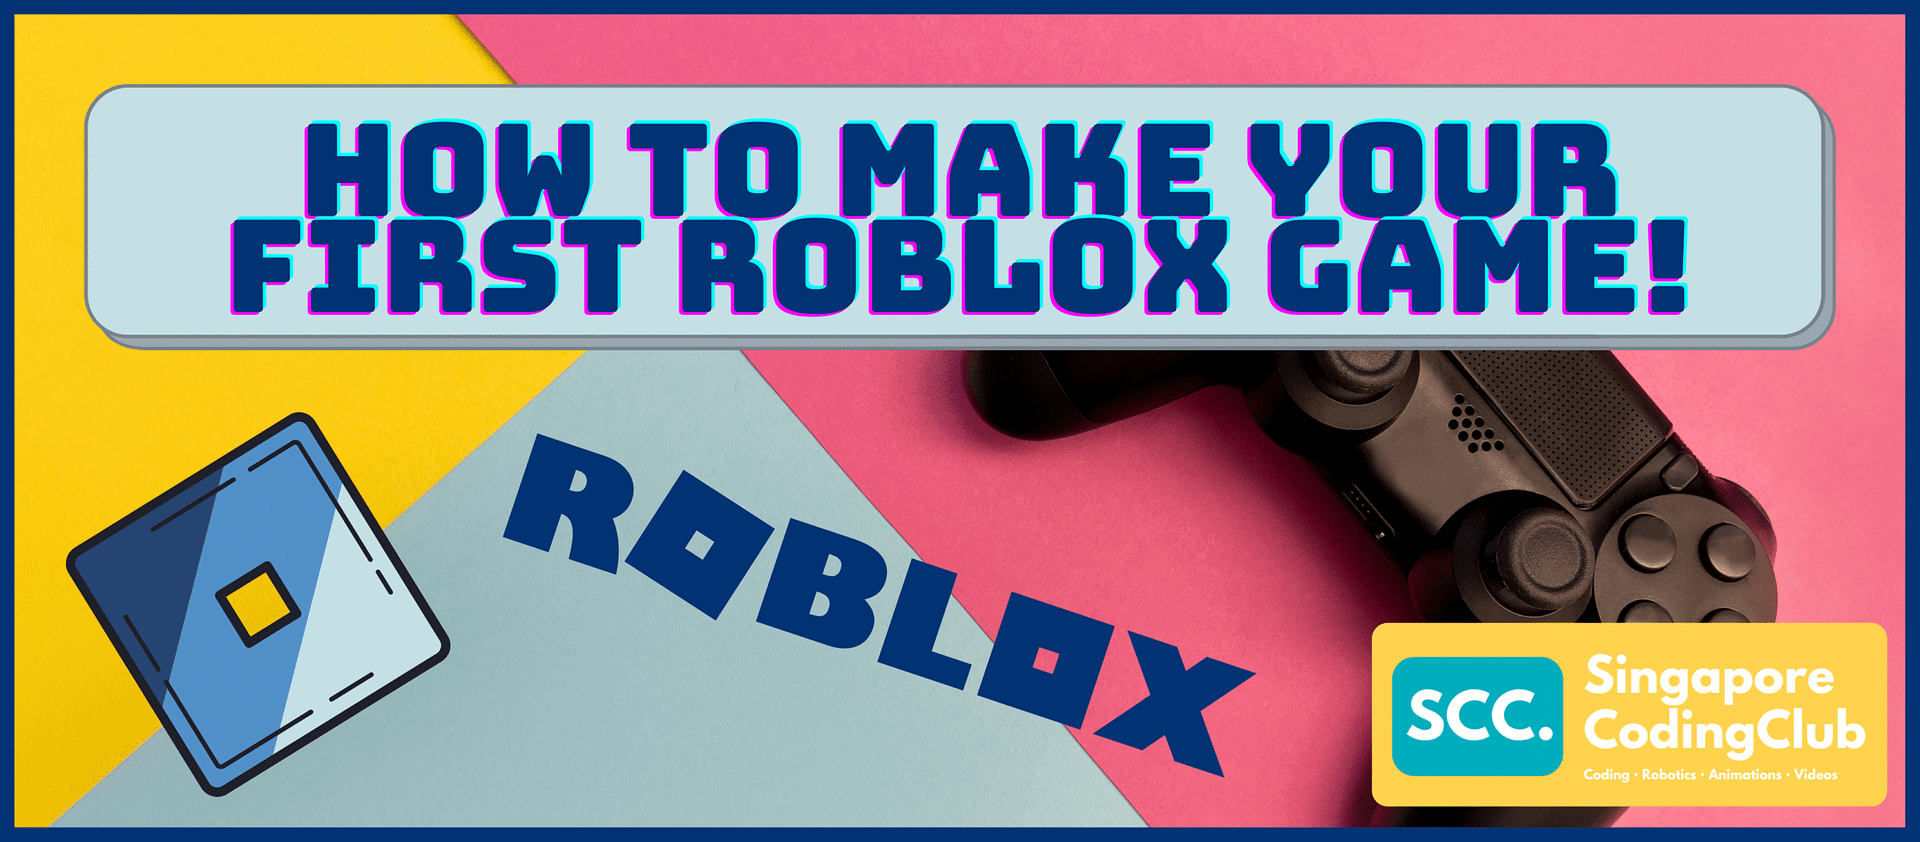 The 5 Best Roblox Games to Play in 2022 - Singapore Coding Club